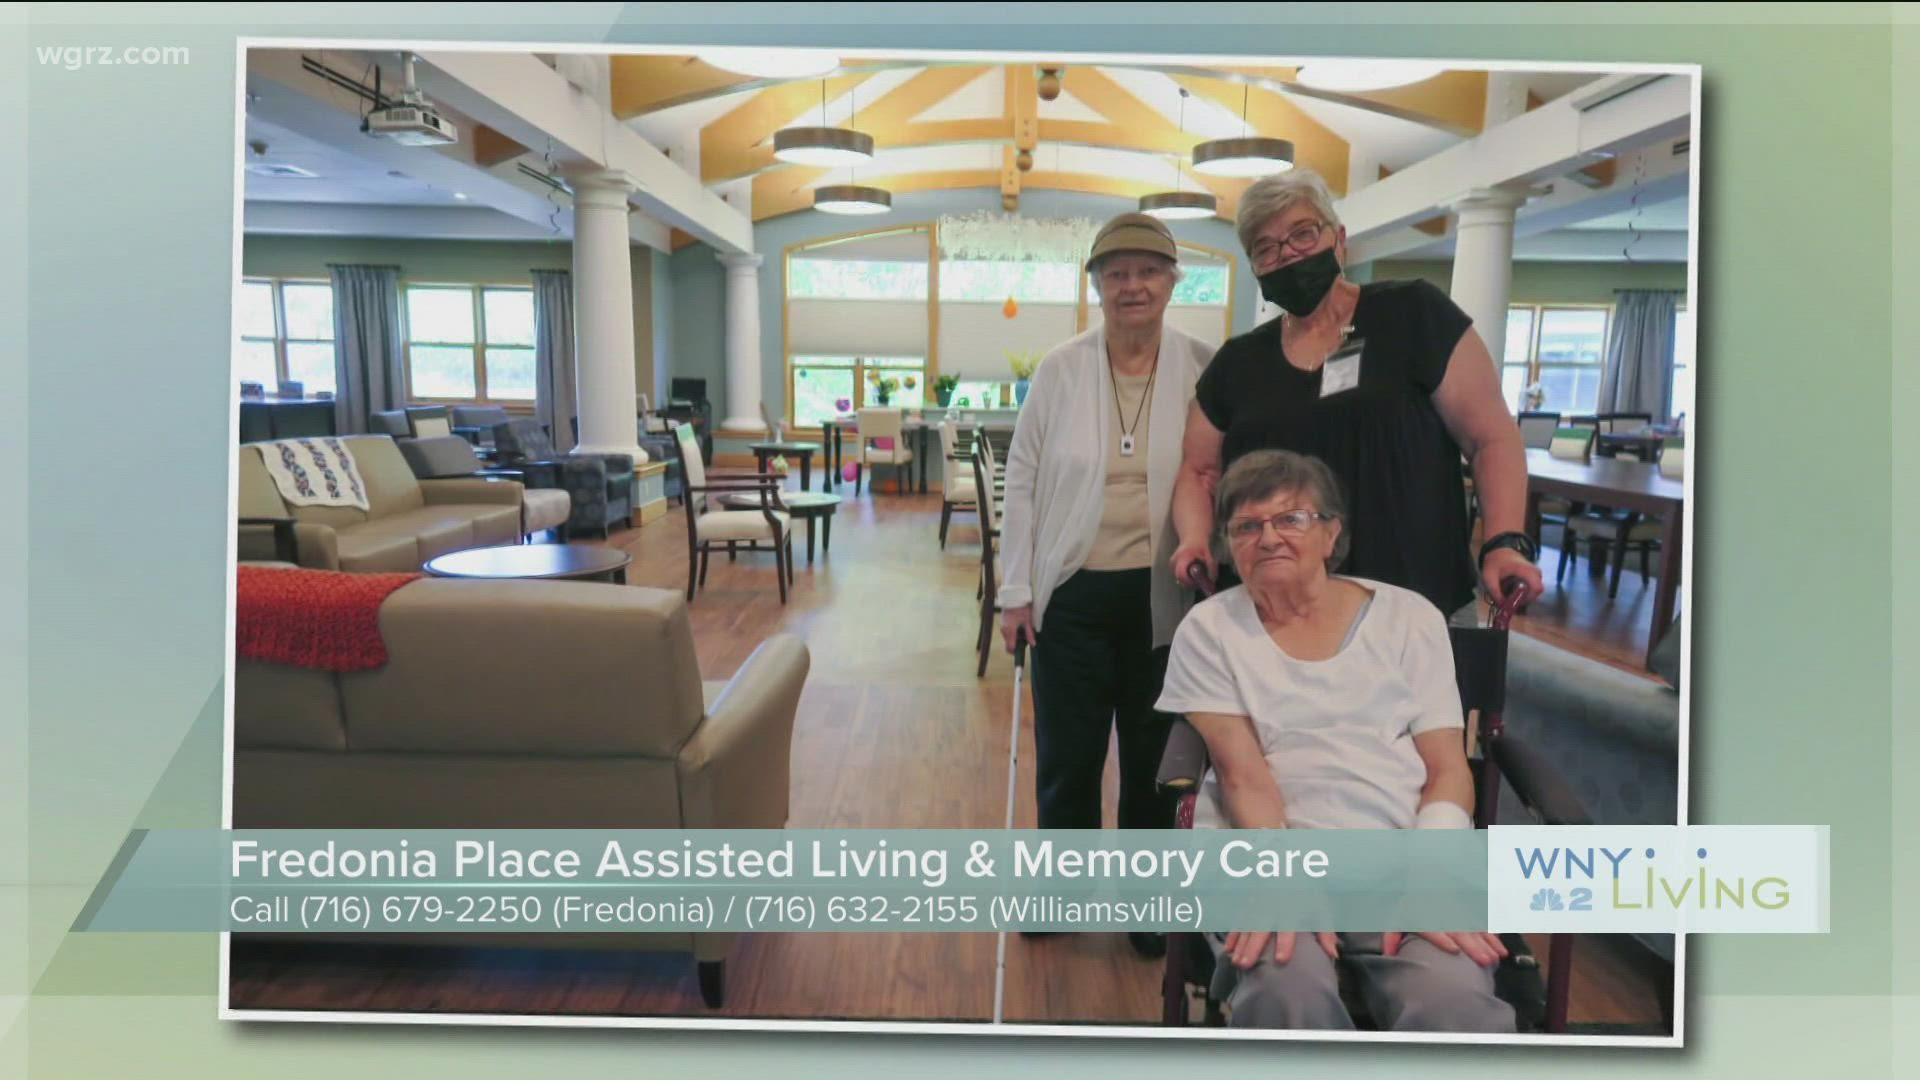 WNY Living - June 25 - Fredonia Place Assisted Living & Memory Care (THIS VIDEO IS SPONSORED BY FREDONIA PLACE ASSISTED LIVING & MEMORY CARE)